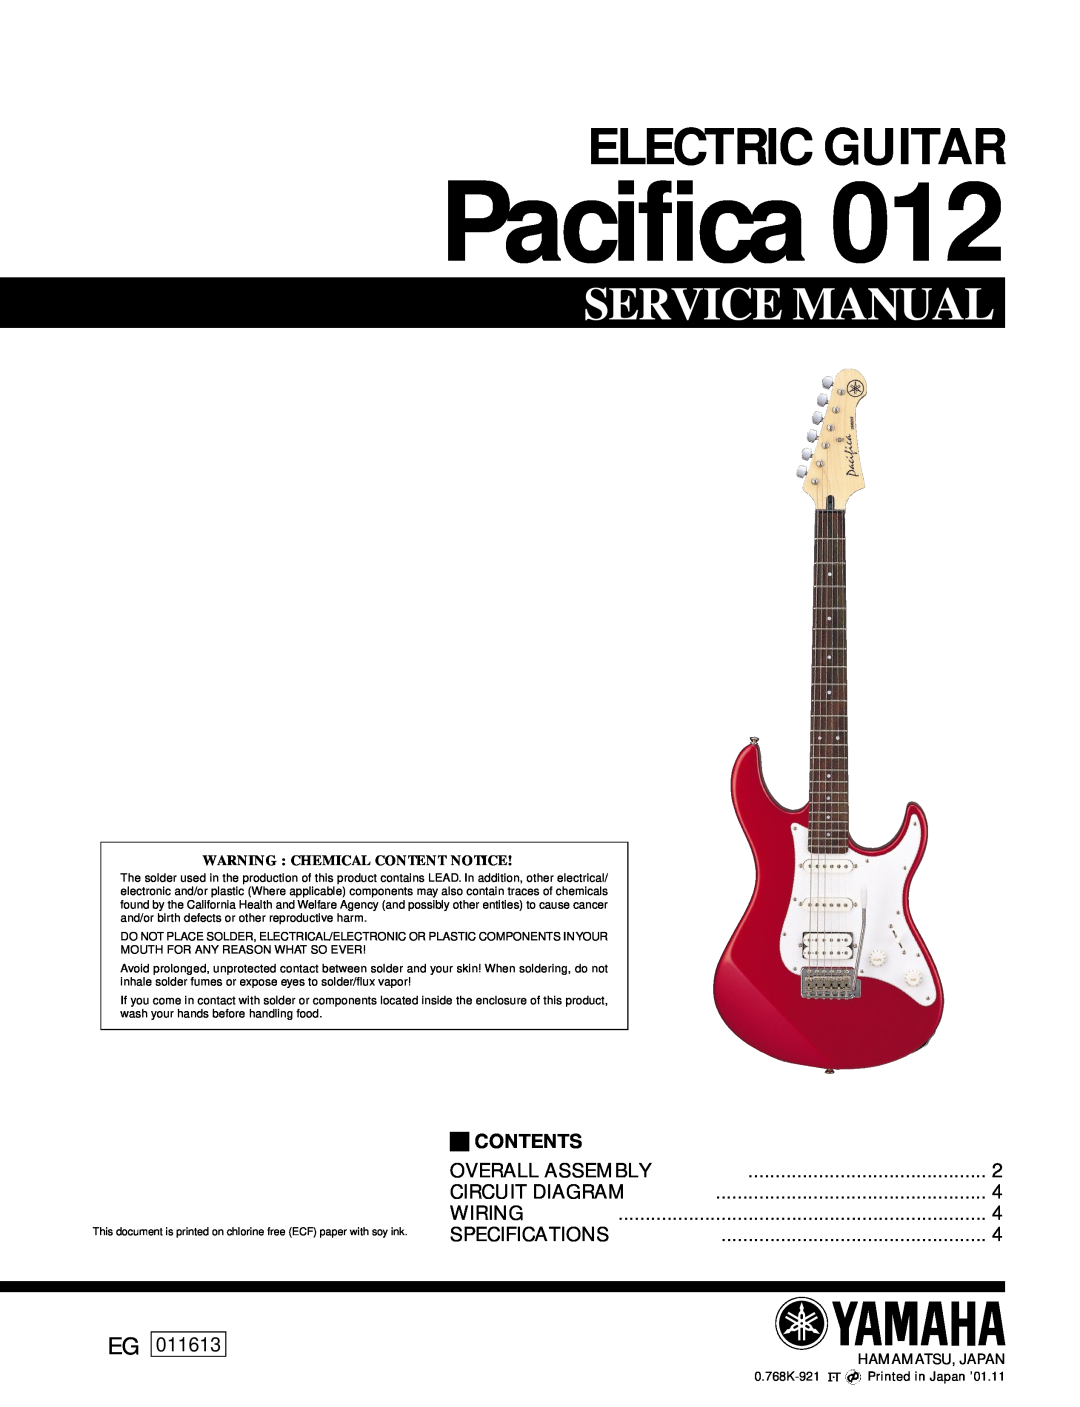 Yamaha Pacifica 012 service manual Electric Guitar, Service Manual, Contents, Overall Assembly, Circuit Diagram, Wiring 